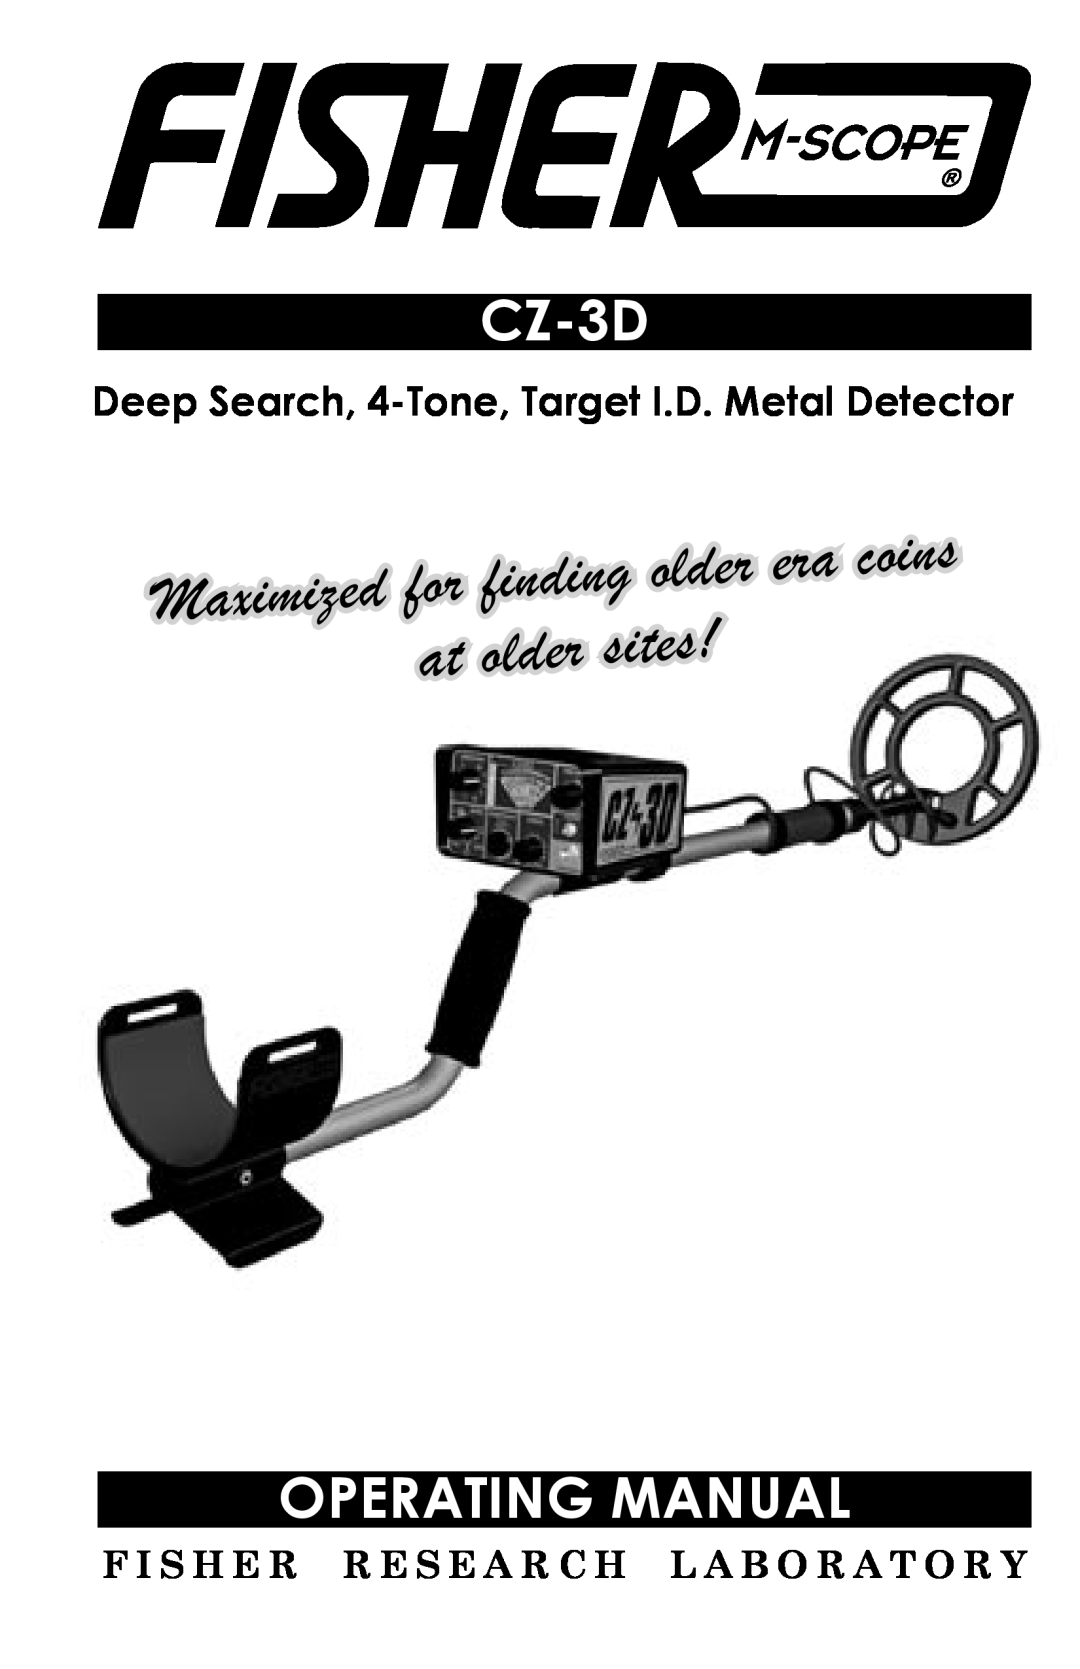 Fisher CZ-3D manual Fisher Research Laboratory, at older sites, Operating Manual, Maximized, for finding older era, coins 